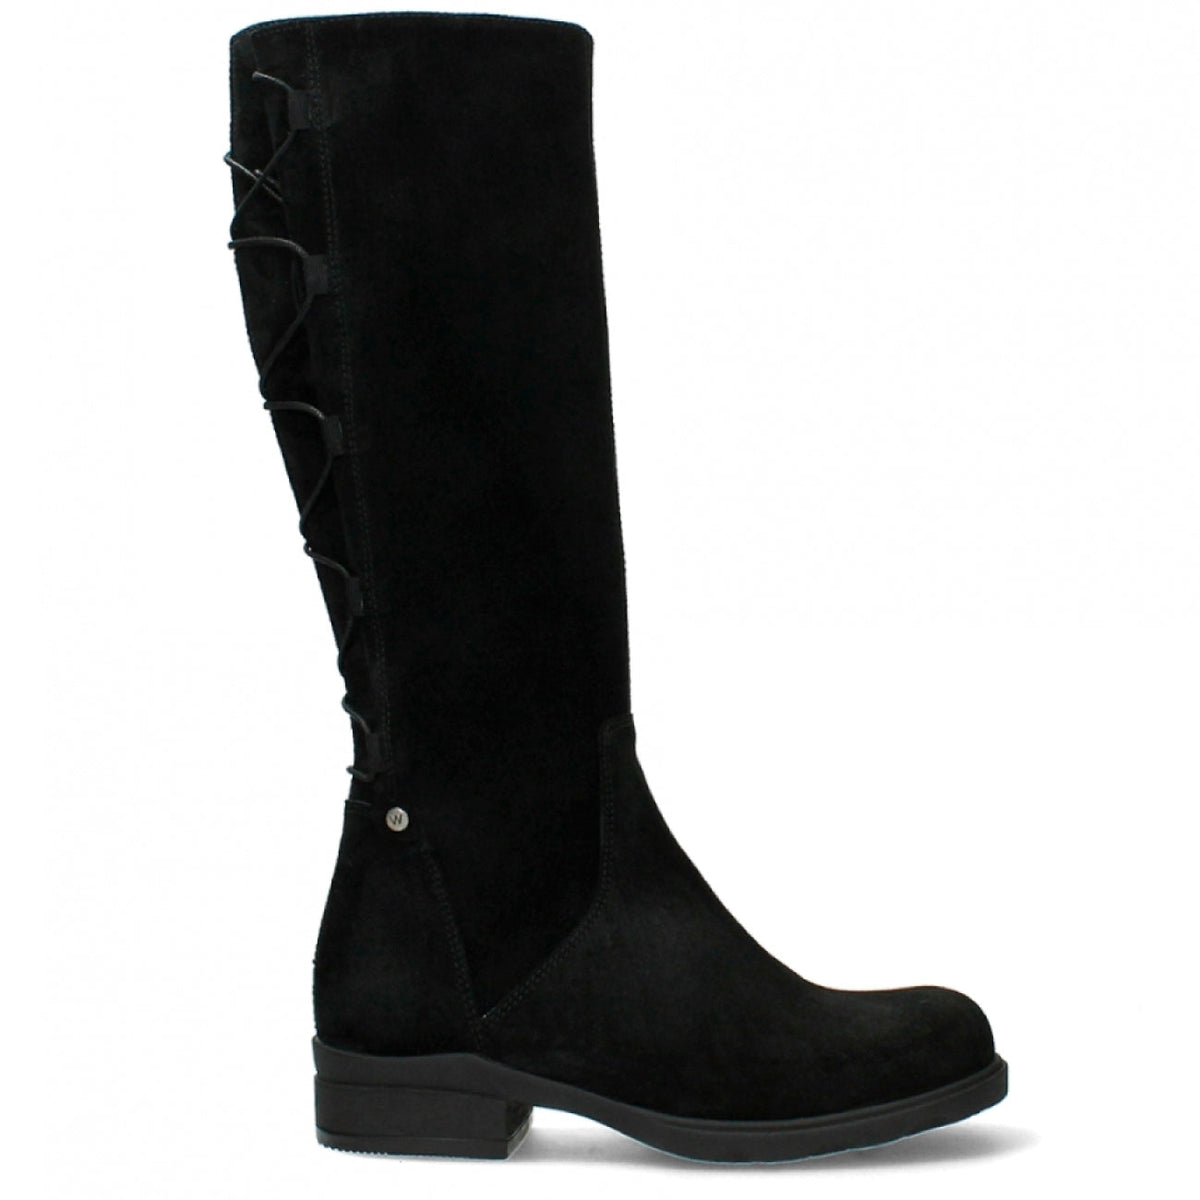 Wolky, Longview, Boots, Liverpool Suede, Black Boots Wolky 